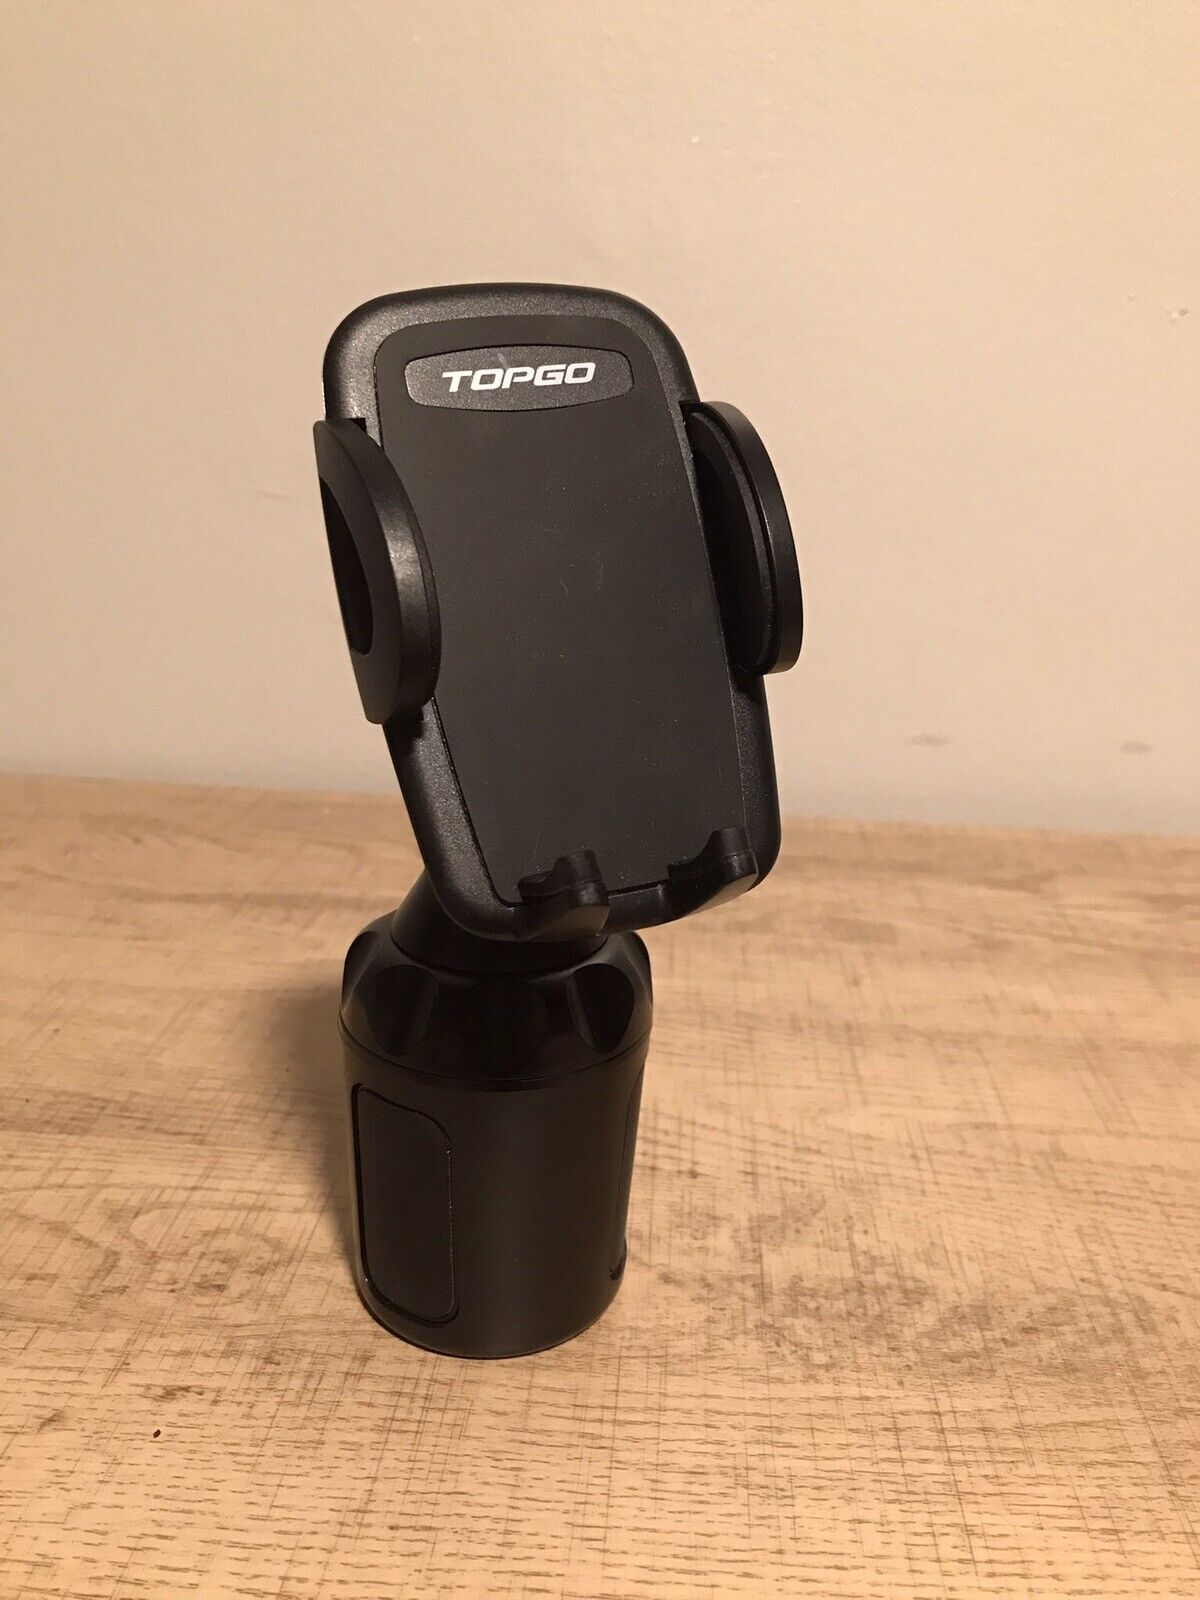 TOPGO CUP HOLDER PHONE MOUNT *GREAT CONDITION*